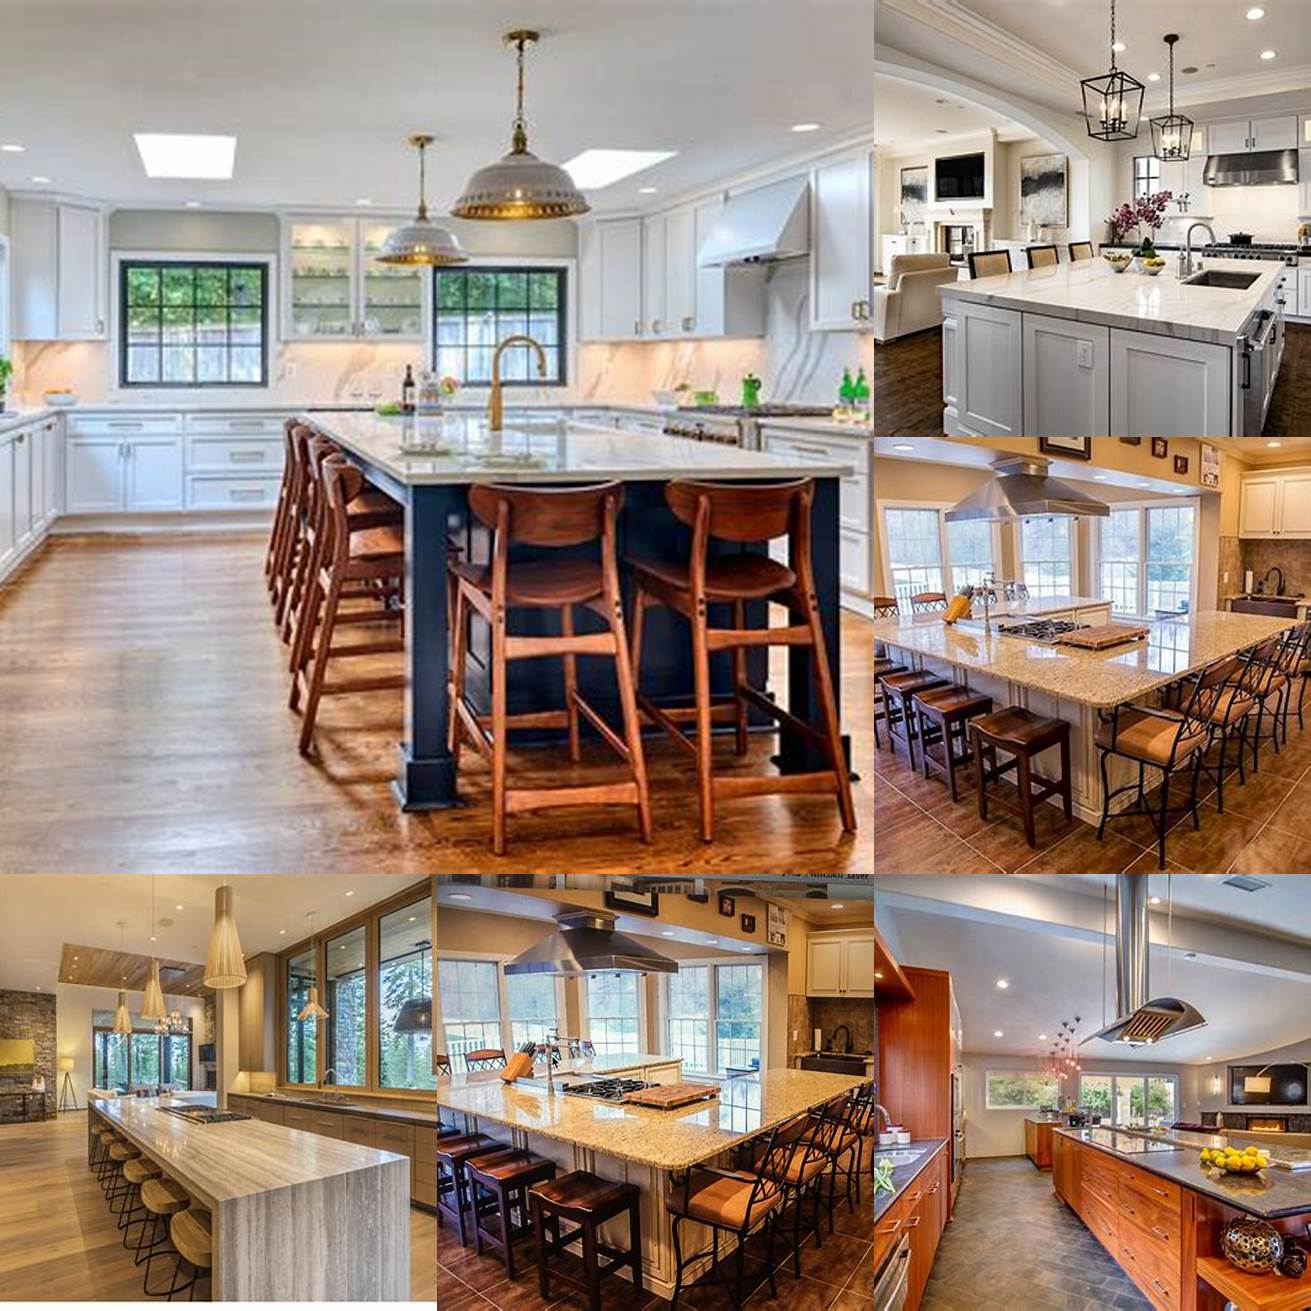 5 An open concept kitchen with a large island and plenty of seating